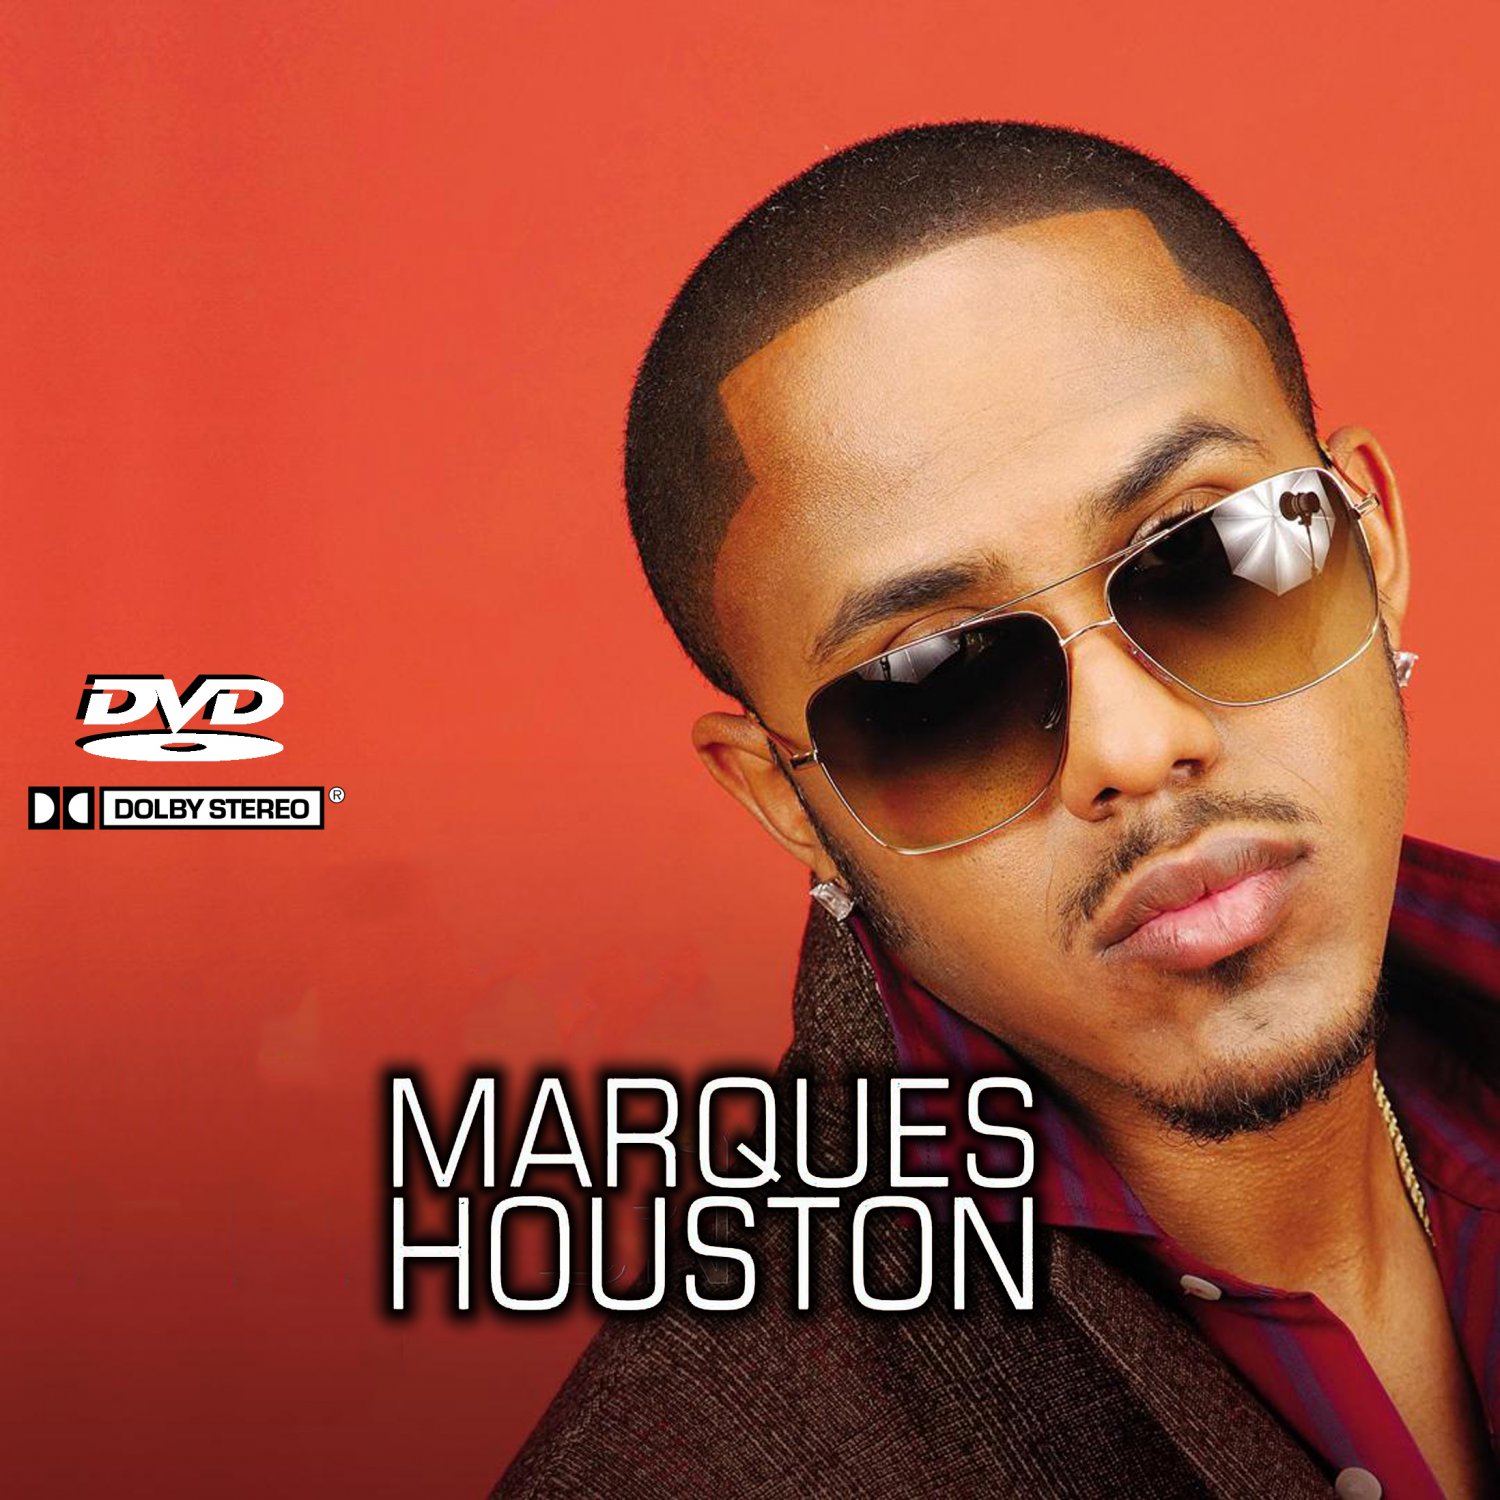 Marques Houston Music Videos Collection (1 DVD) 28 Music Videos